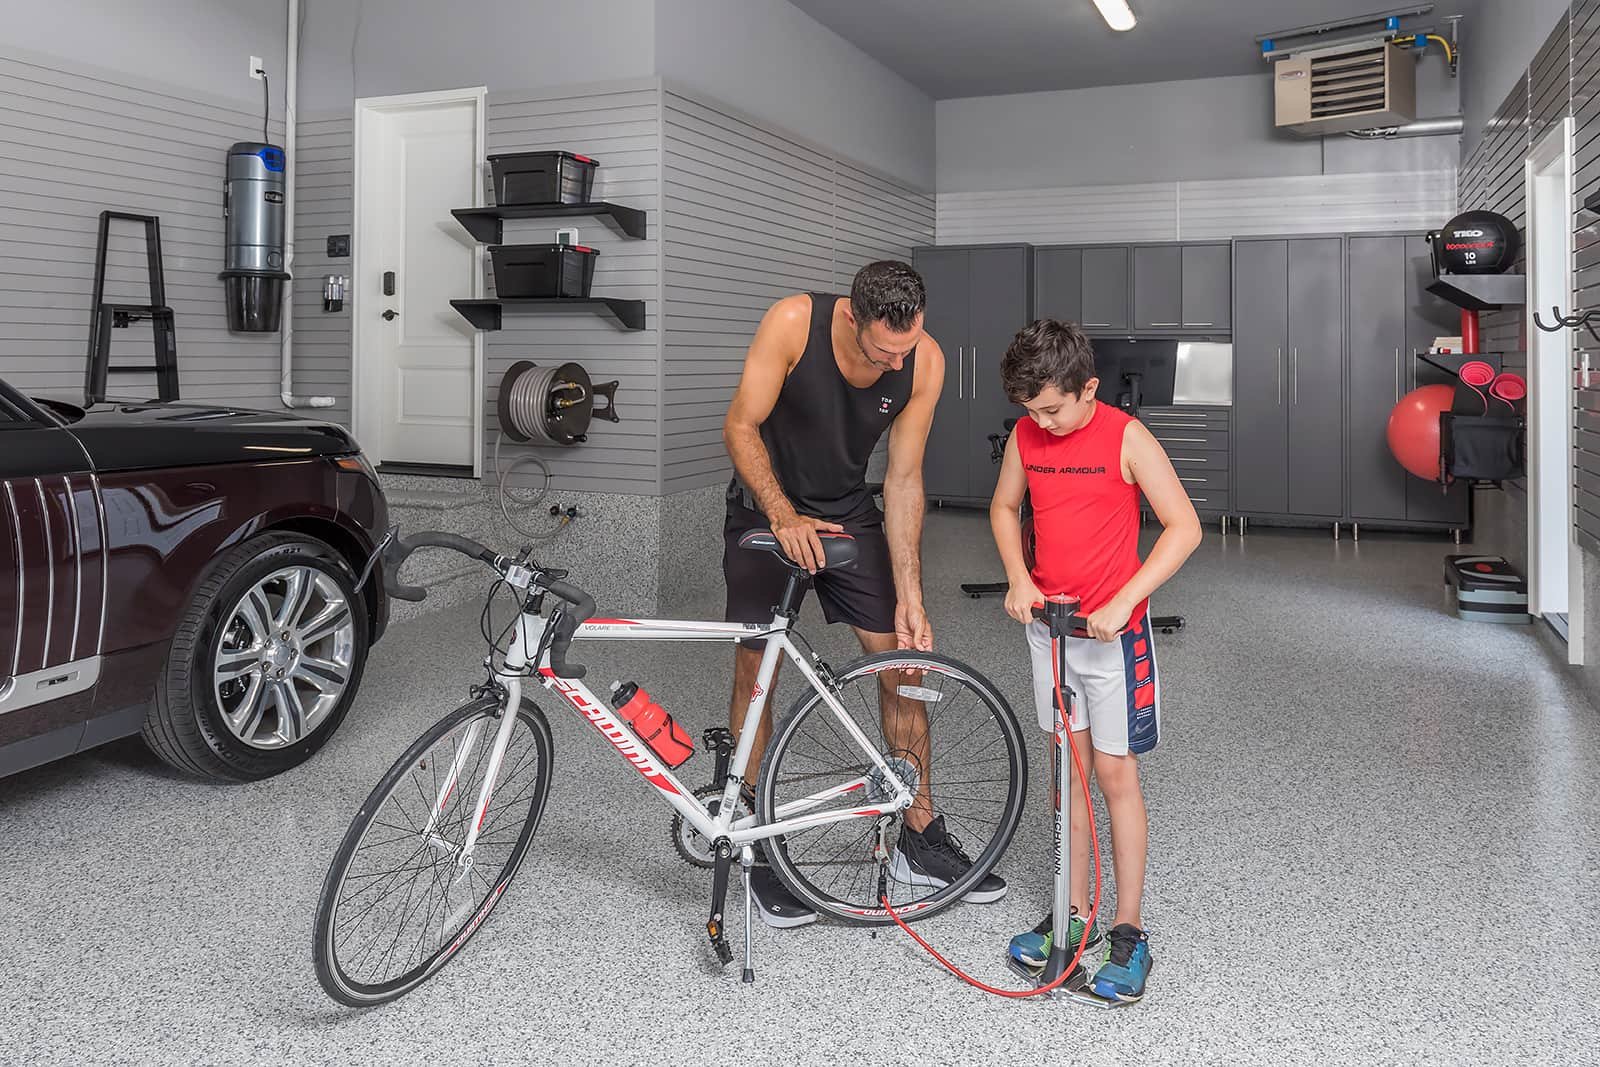 xfather-son-bicycle-pump-fitness-room-garage.jpg.pagespeed.ic.qTzjwn07kD